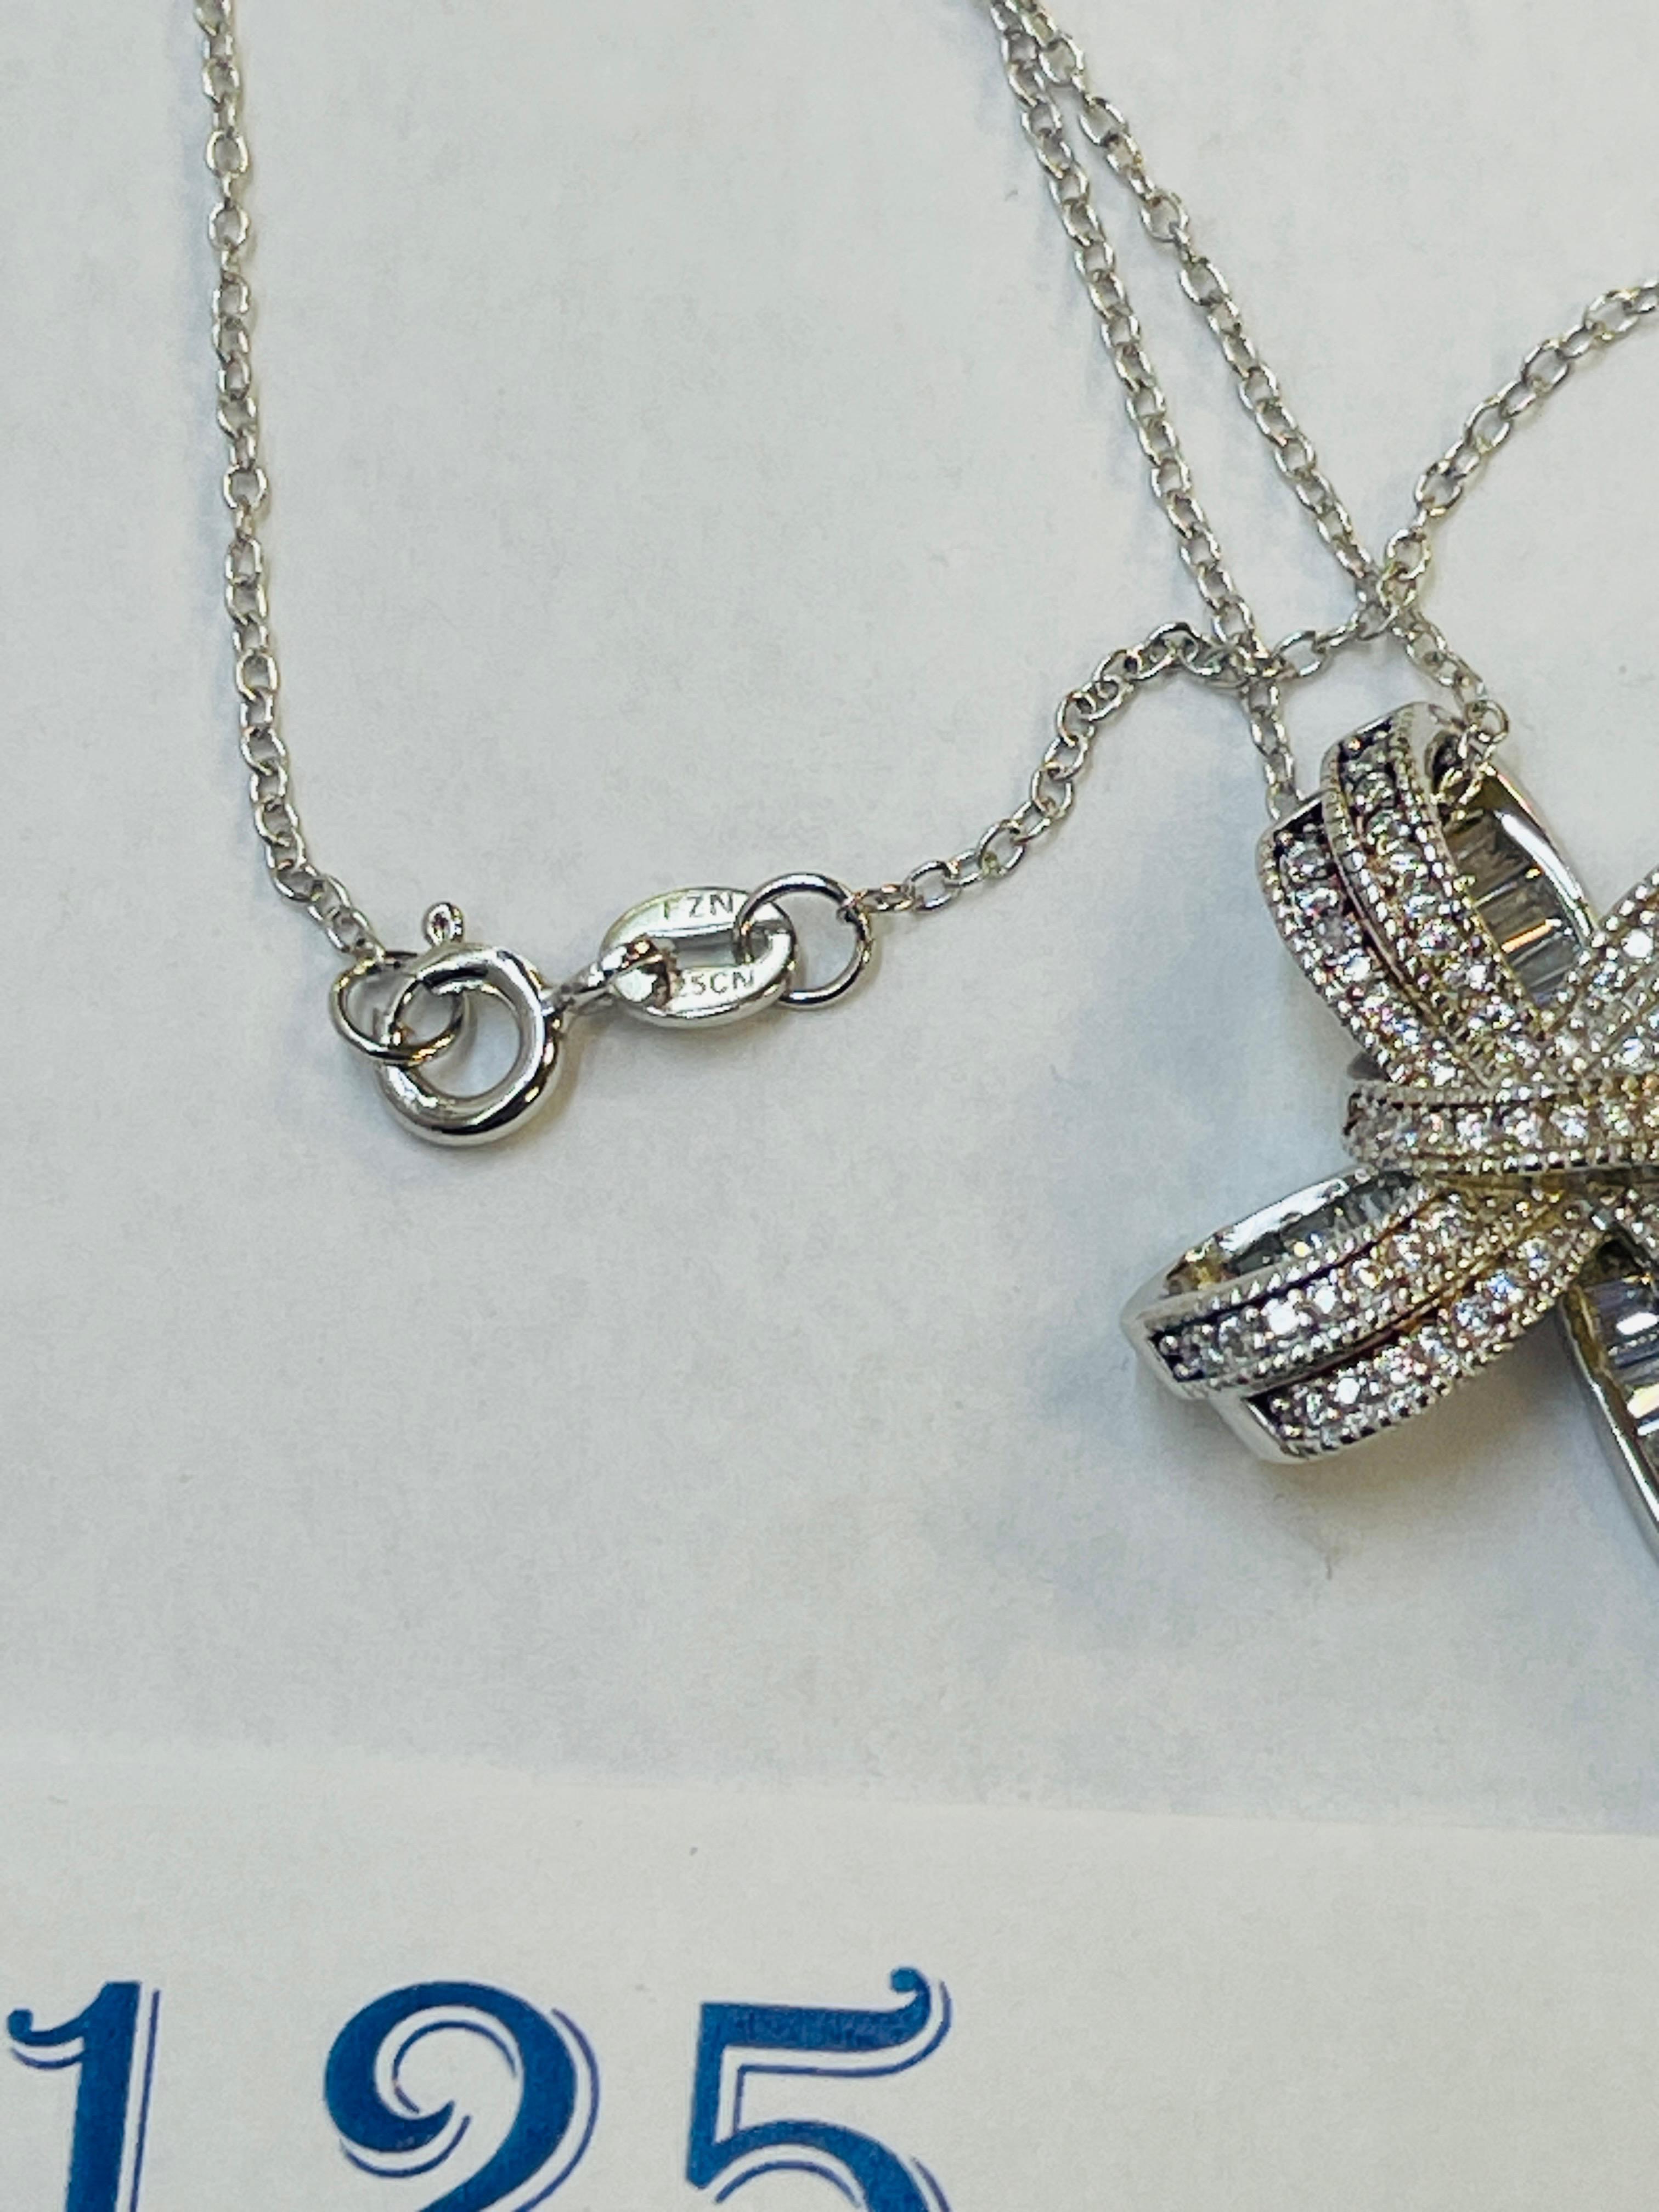 STERLING SILVER SIMULATED DIAMOND CROSS PENDANT WITH STERLING CHAIN